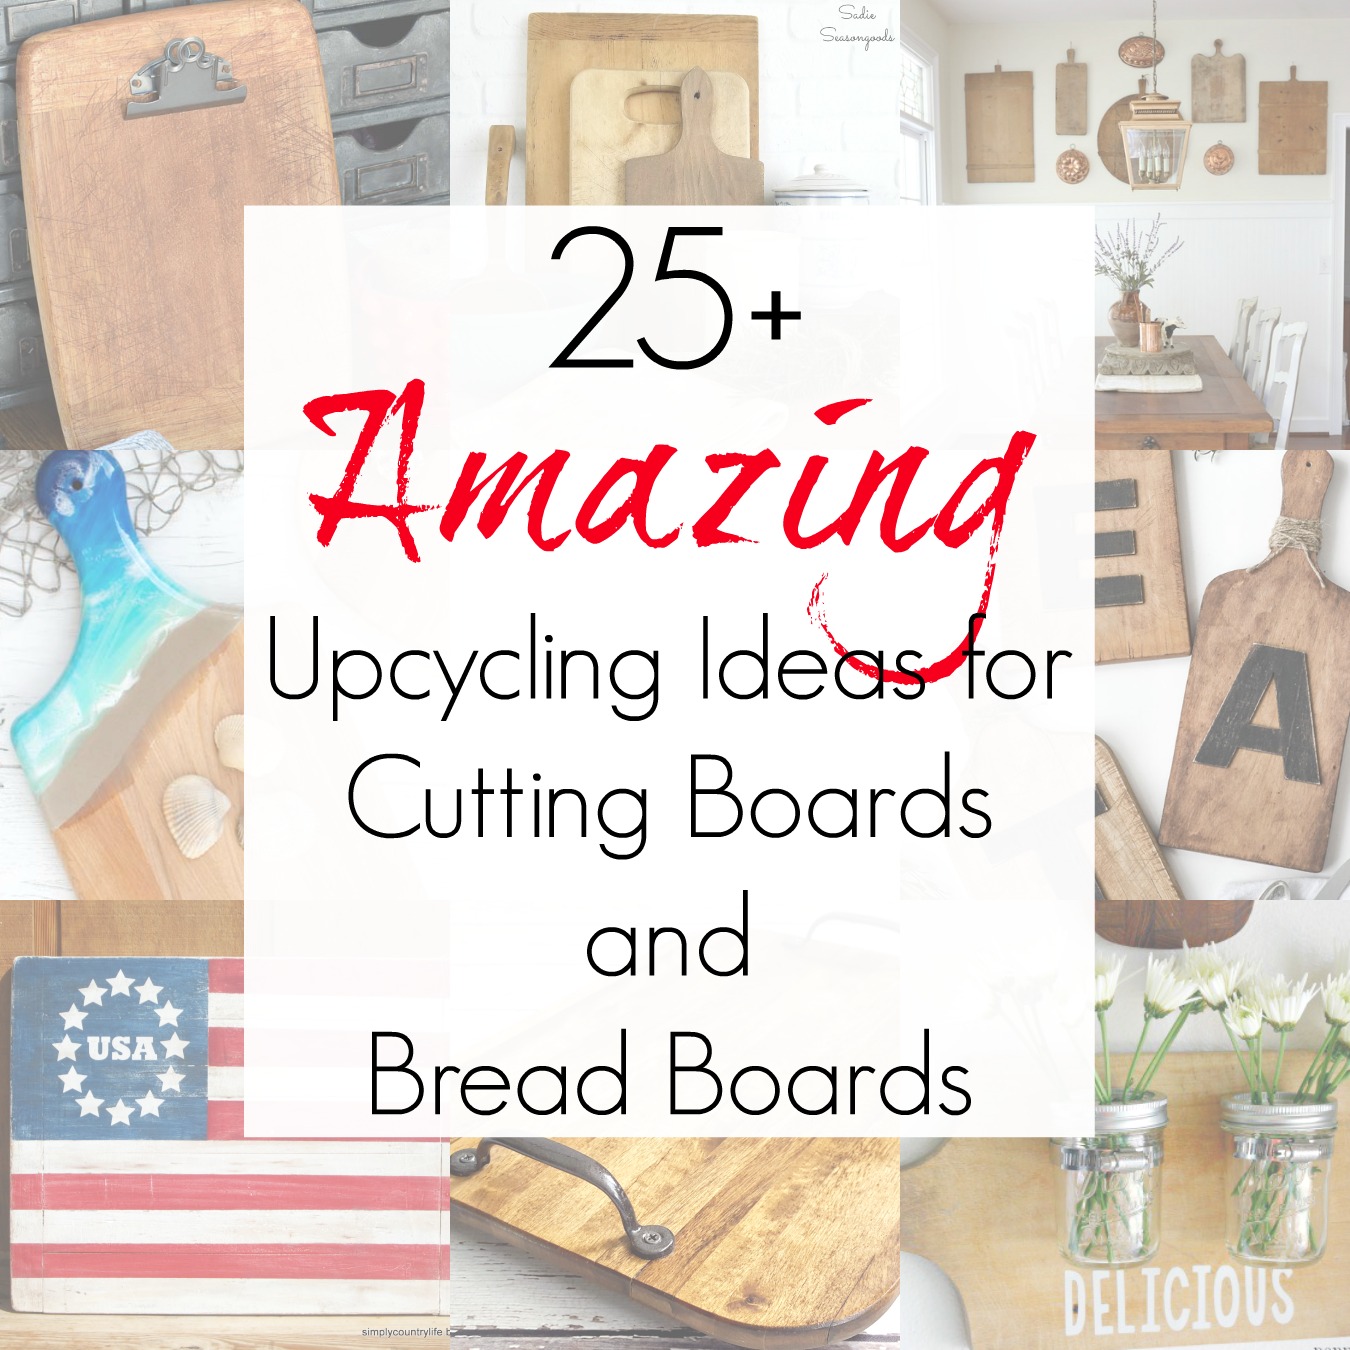 Cutting board ideas and cutting board crafts for wooden bread boards